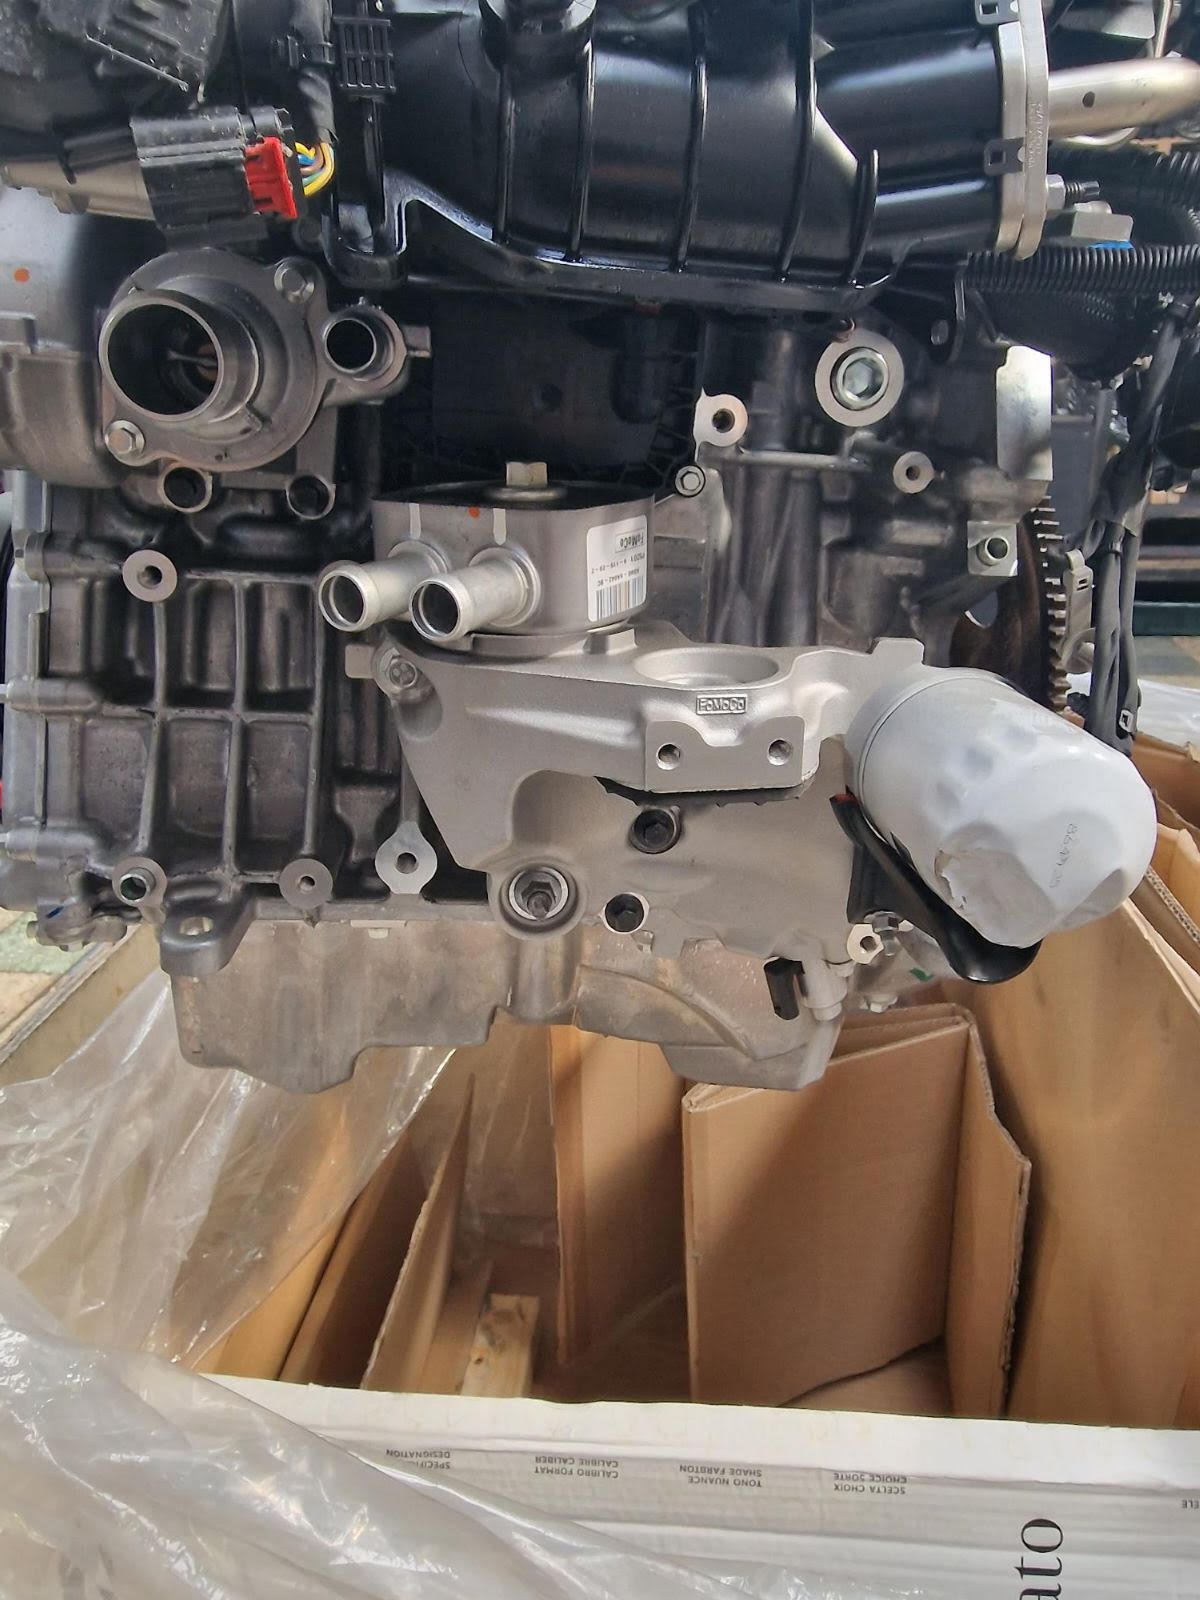 Special Offer - Brand New - Still in Crate - 100 x Ford 2.3L EcoBoost Petrol Engines From Ford Mustang and Ford Ranger Models